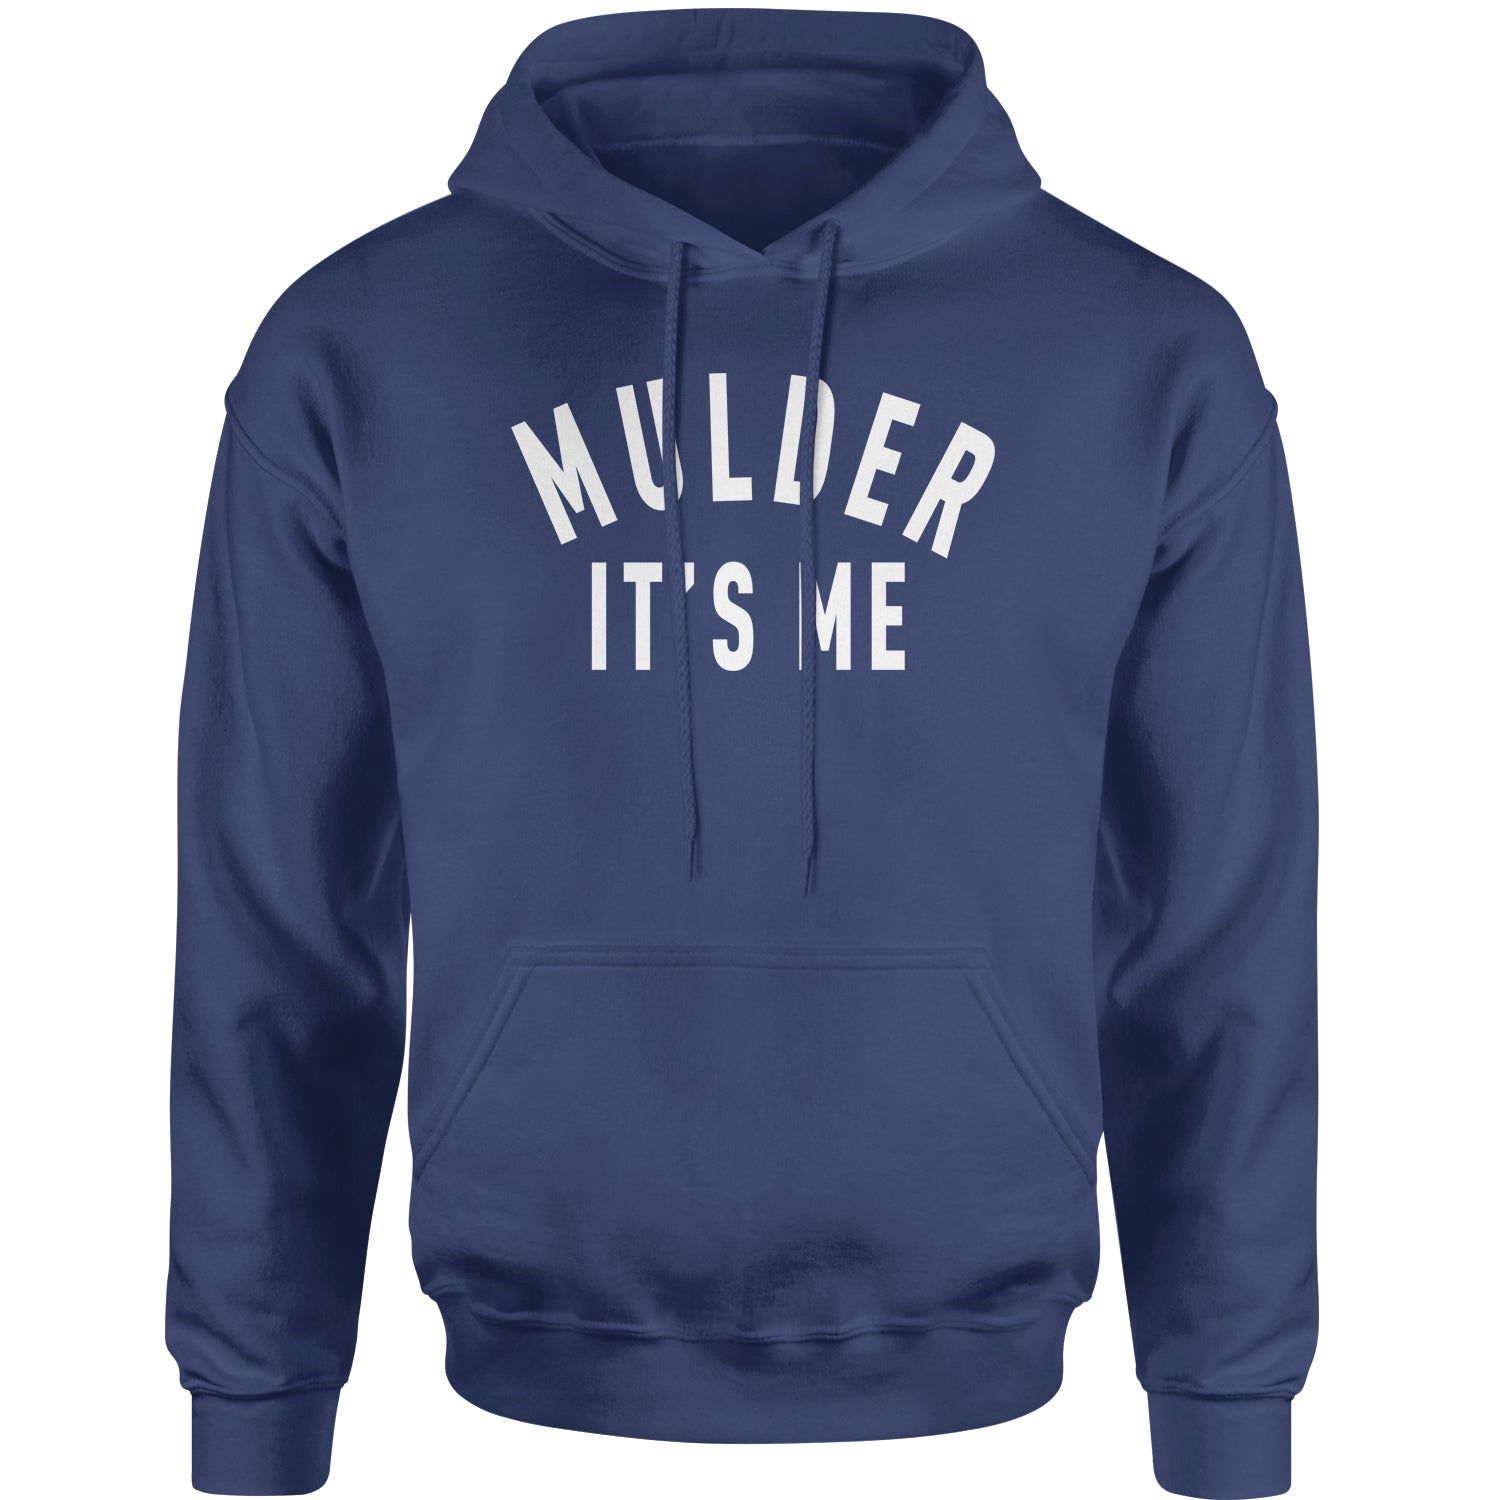 Mulder, It's Me Adult Hoodie Sweatshirt 51, area, believe, files, is, mulder, out, scully, the, there, truth, x, xfiles by Expression Tees